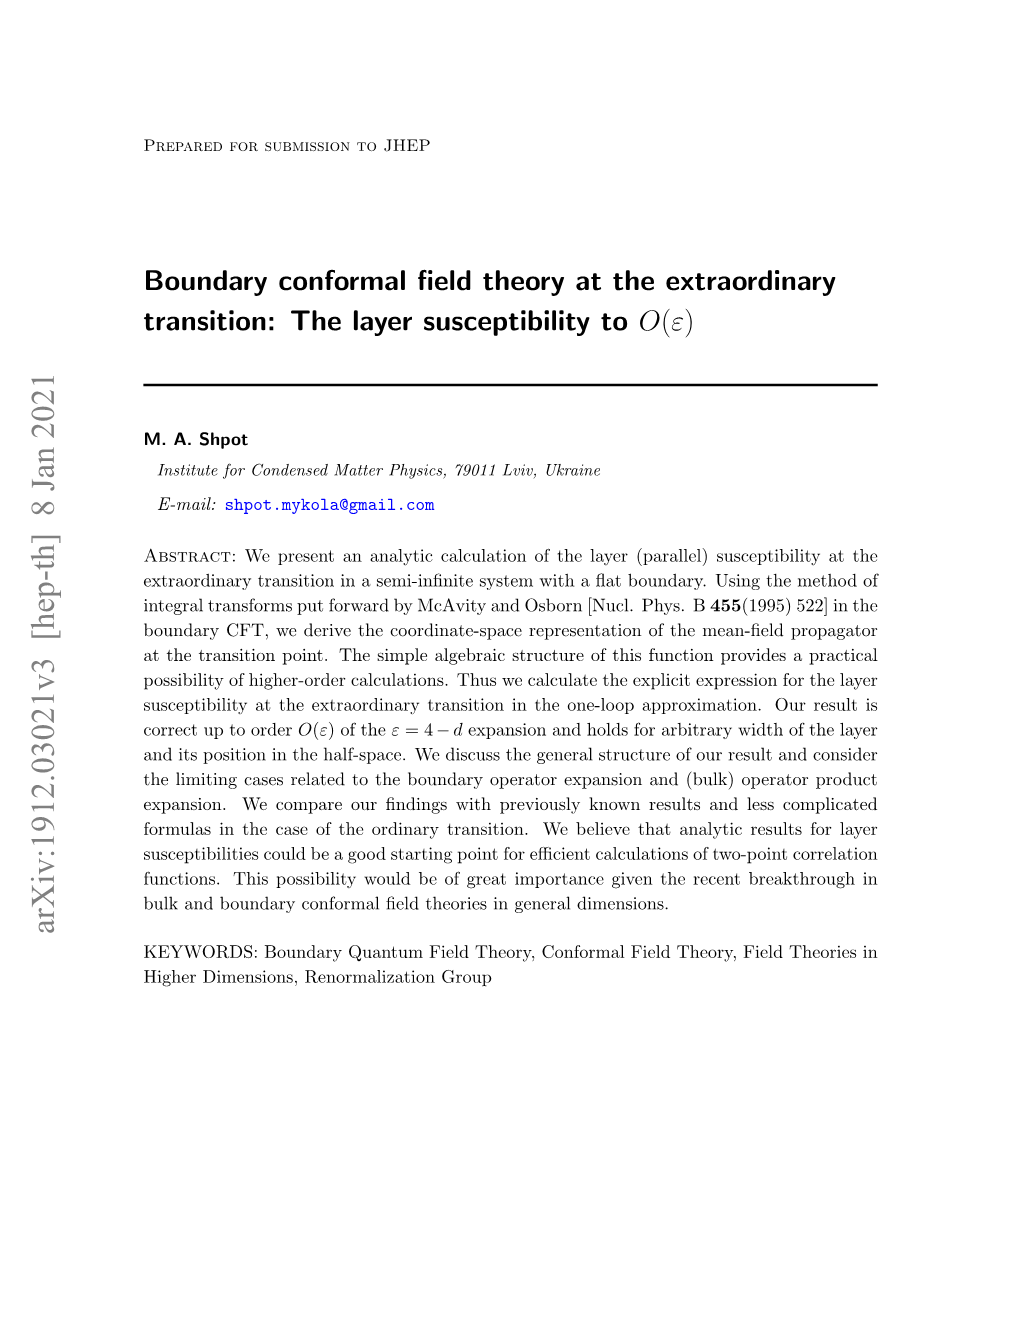 Boundary Conformal Field Theory at the Extraordinary Transition